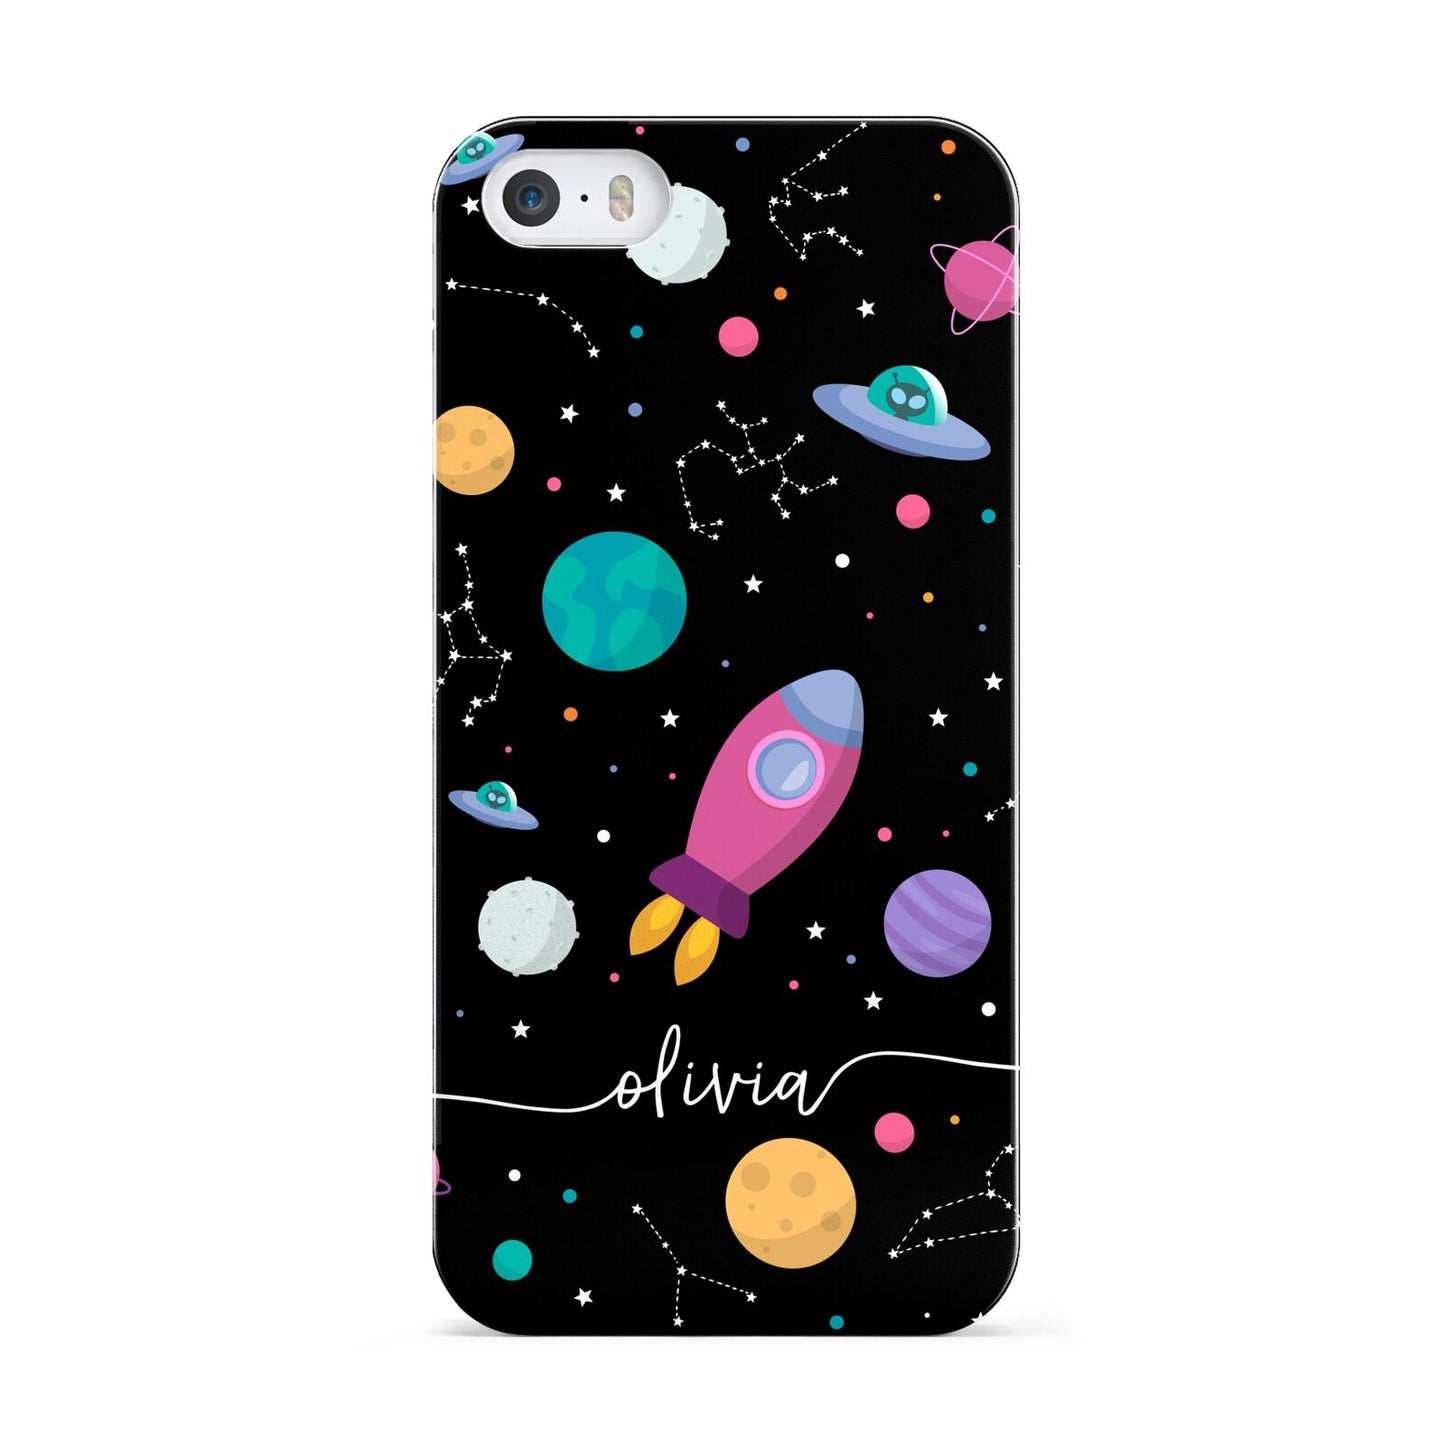 Galaxy Artwork with Name Apple iPhone 5 Case